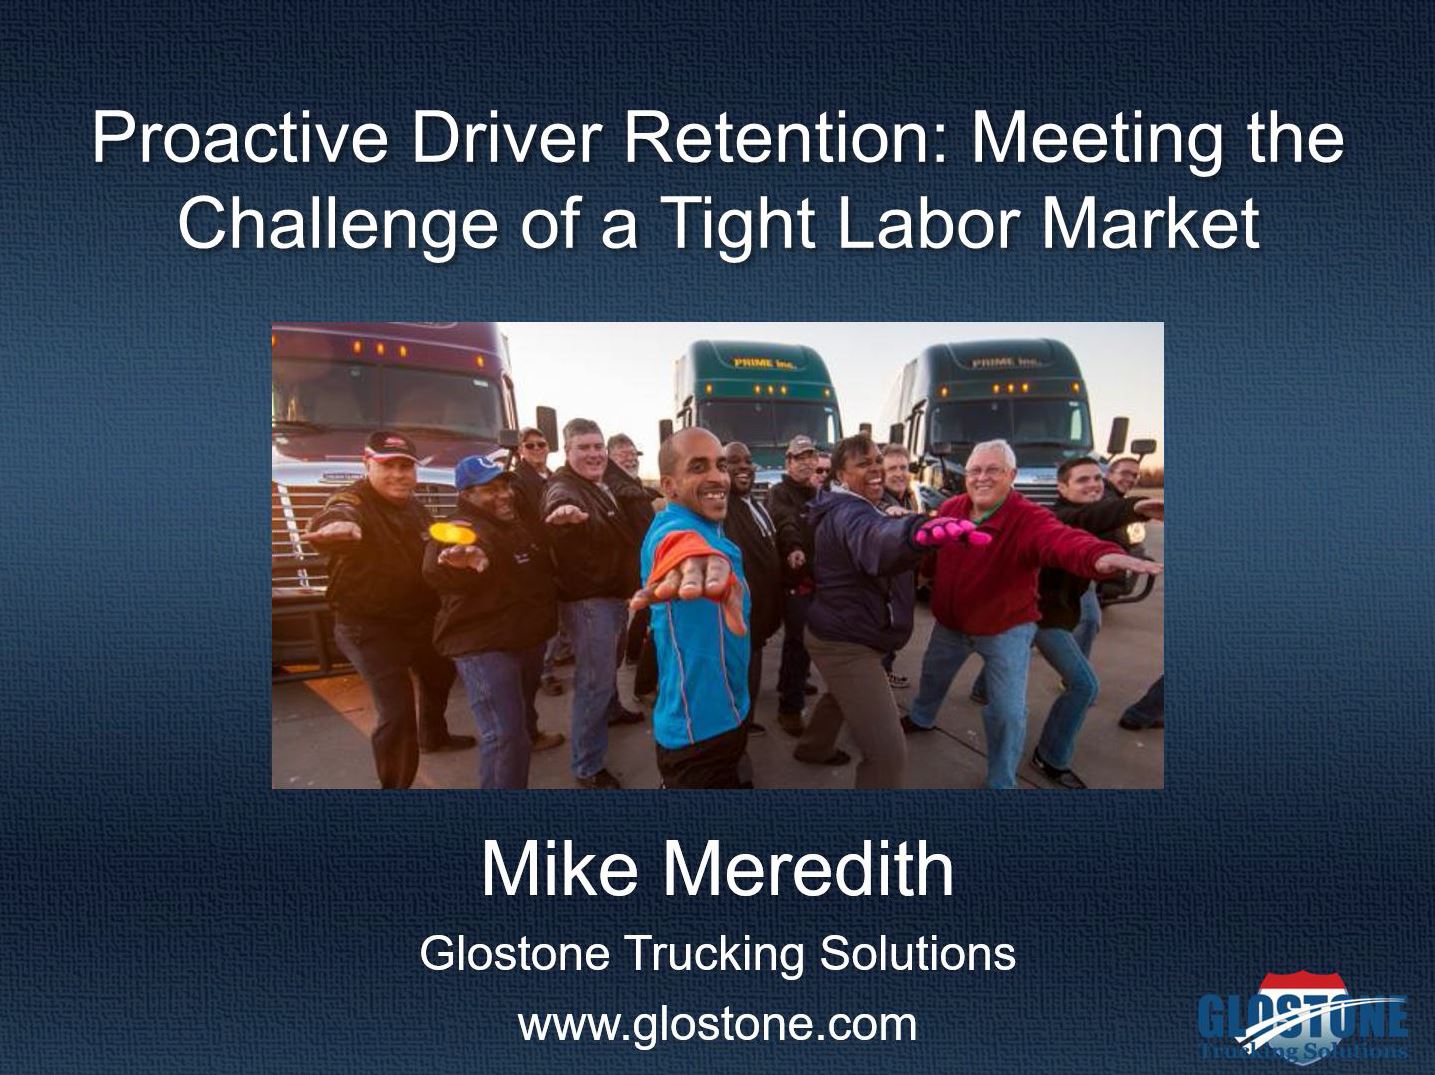 May 2018 webinar: Proactive Driver Retention: Meeting the Challenge of a Tight Labor Market